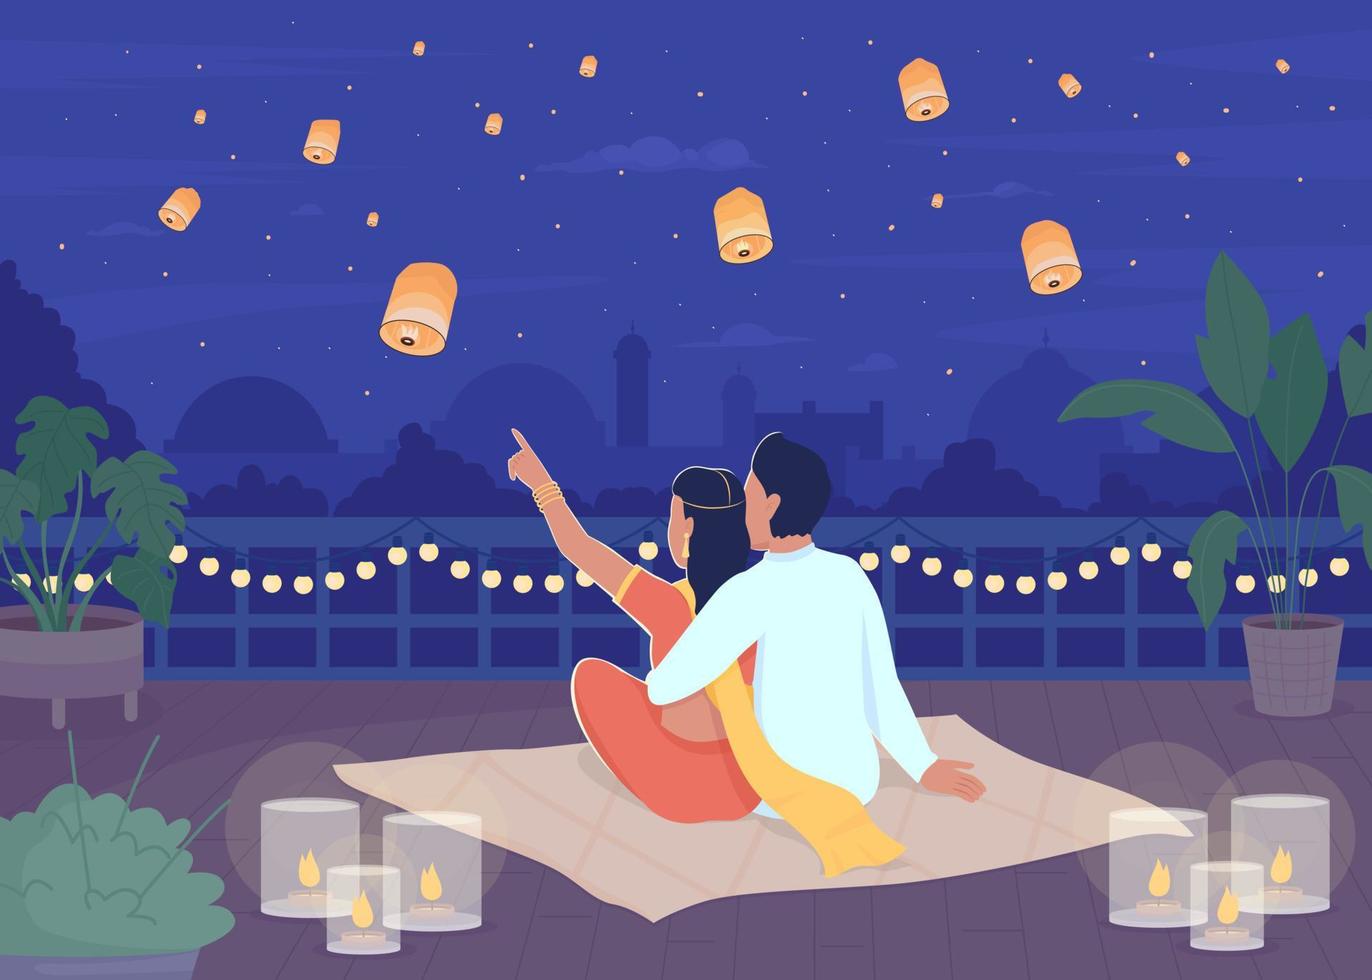 Watching lanterns in sky on Diwali flat color vector illustration. Couple enjoying holiday together on roof. Fully editable 2D simple cartoon characters with romantic atmosphere on background